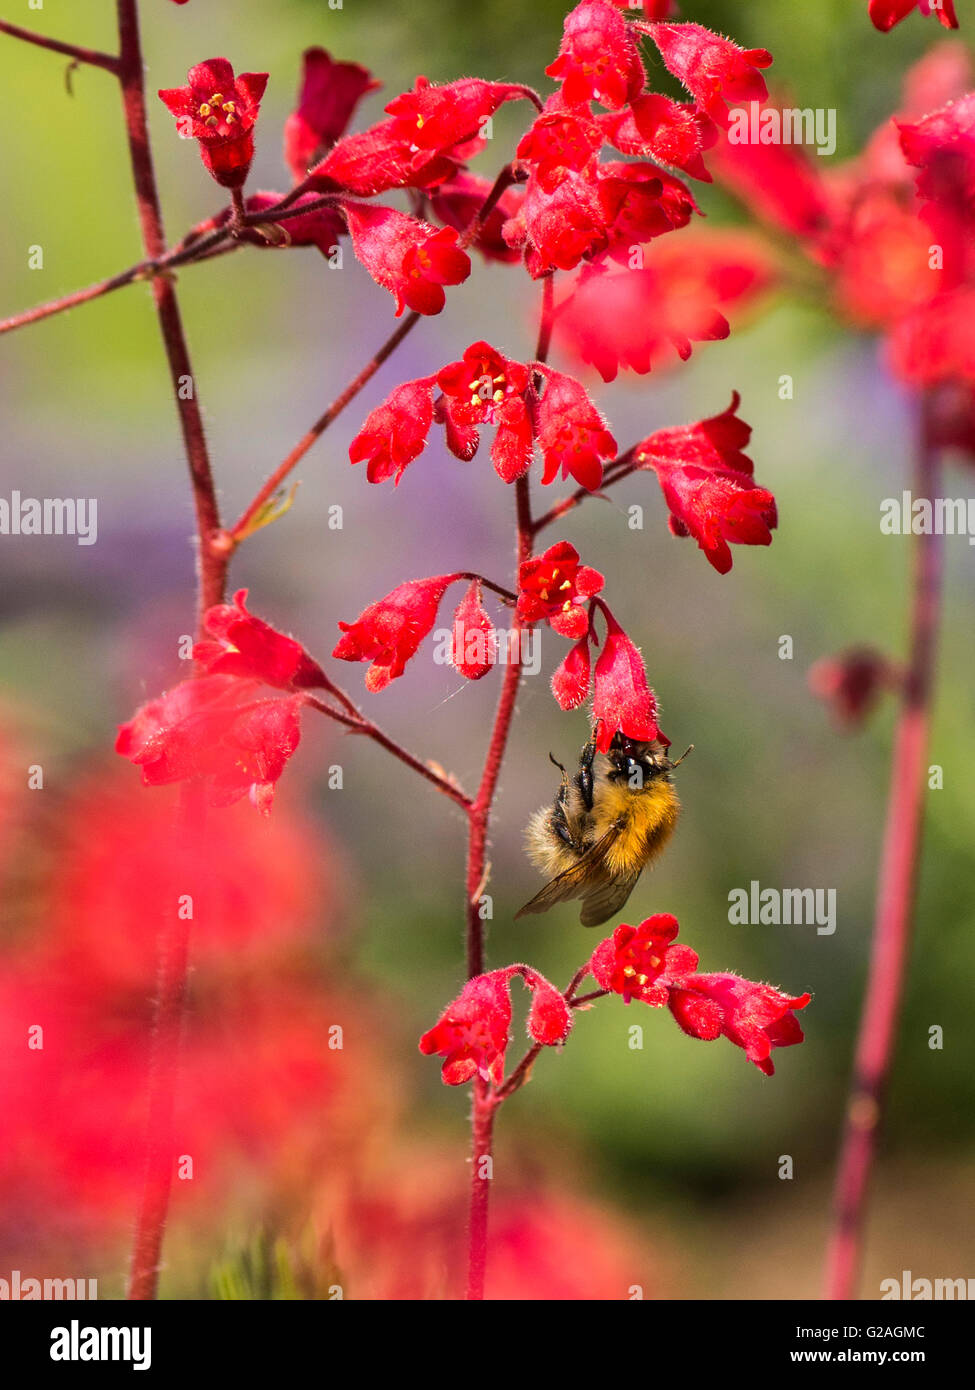 Spring Pollinator, Bumblebee (Bombus) collecting nectar from the vivid red bell shaped flowers of the Heuchera plant. Stock Photo